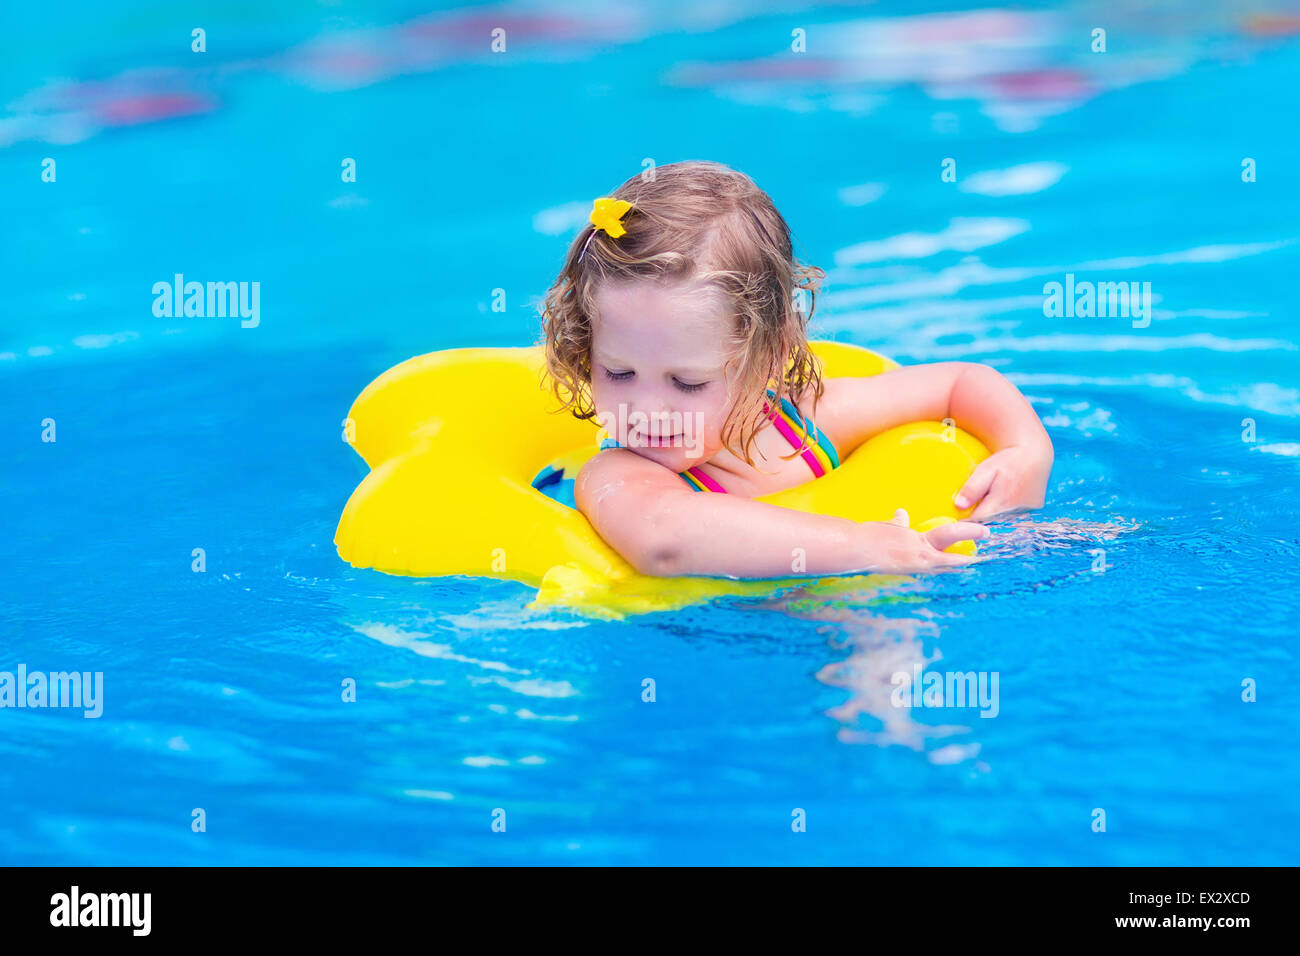 Kids in swimming pool. Children swim outdoors. Toddler child during vacation in a tropical resort with palm trees. Stock Photo